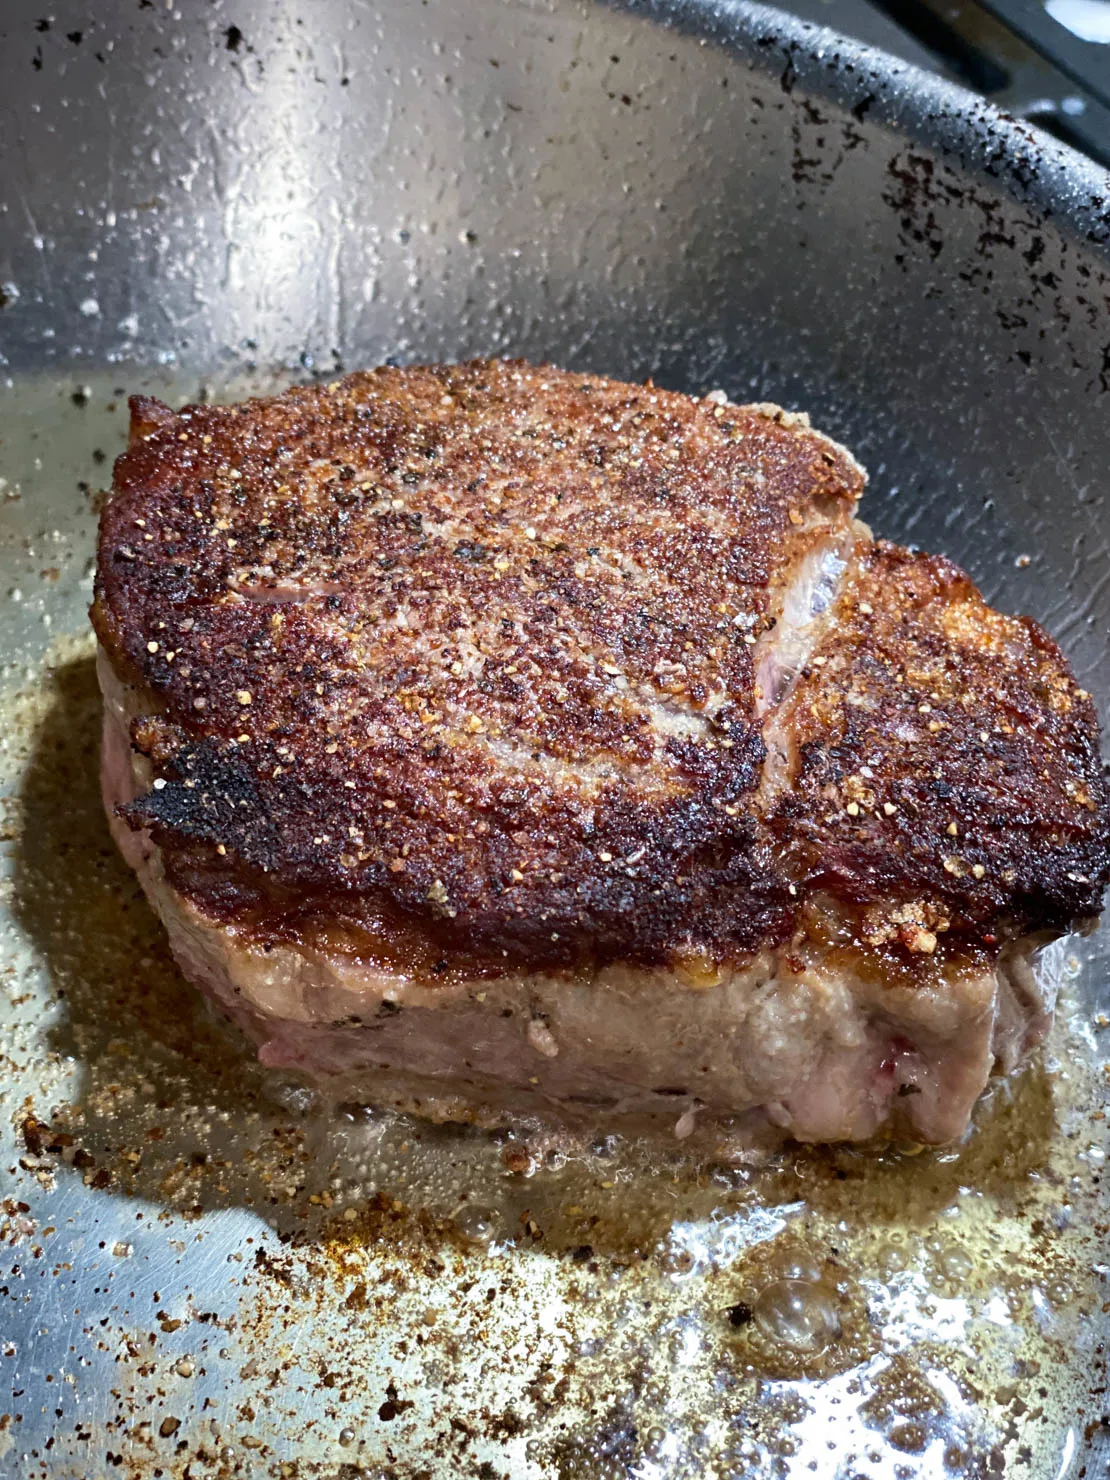 A completed seared filet mignon